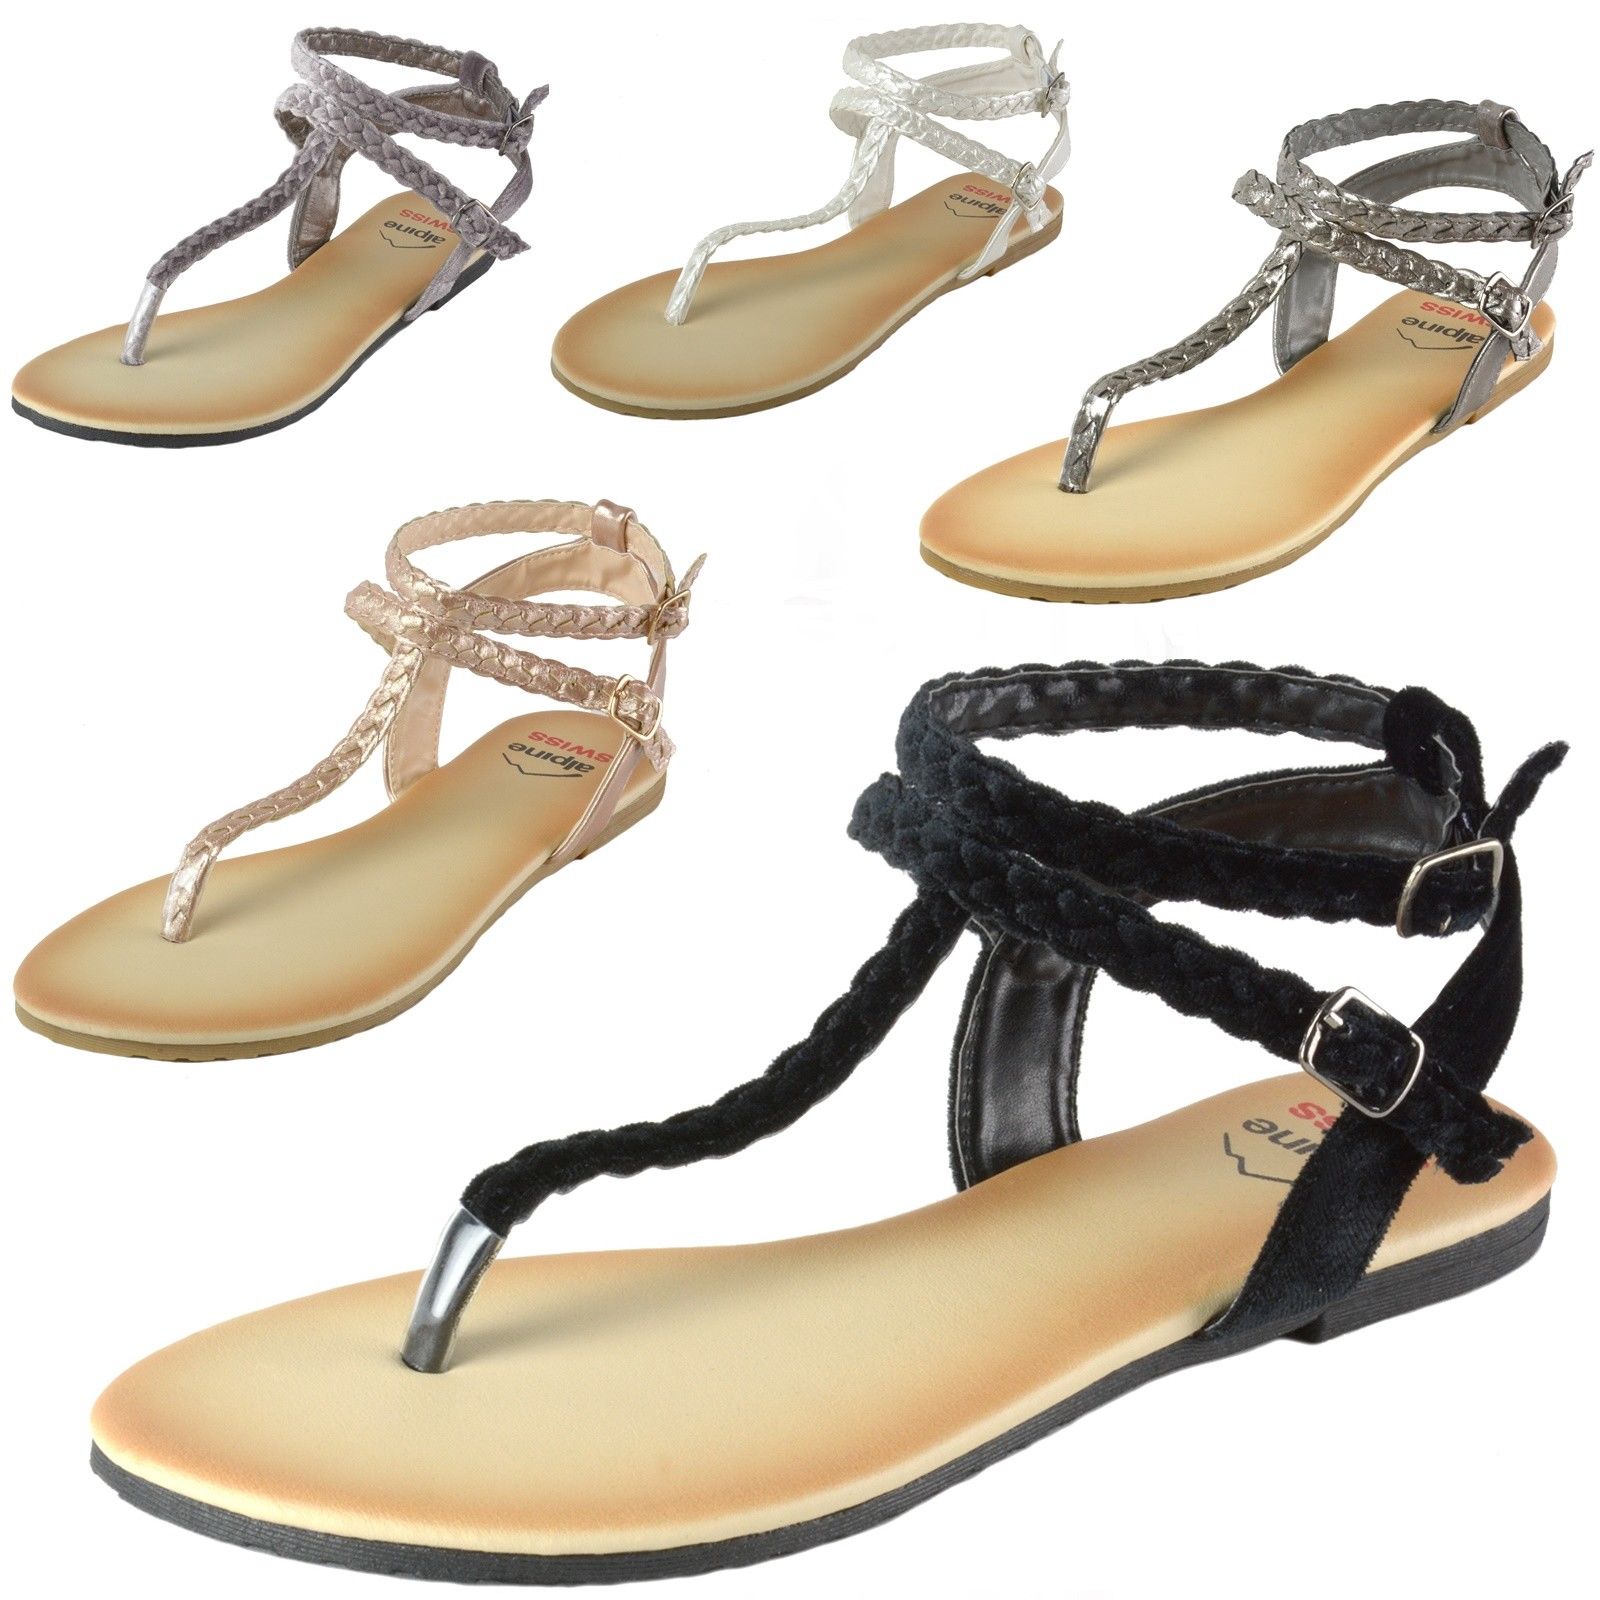 Alpine Swiss Braided Gladiator Sandals for only $9.99!!